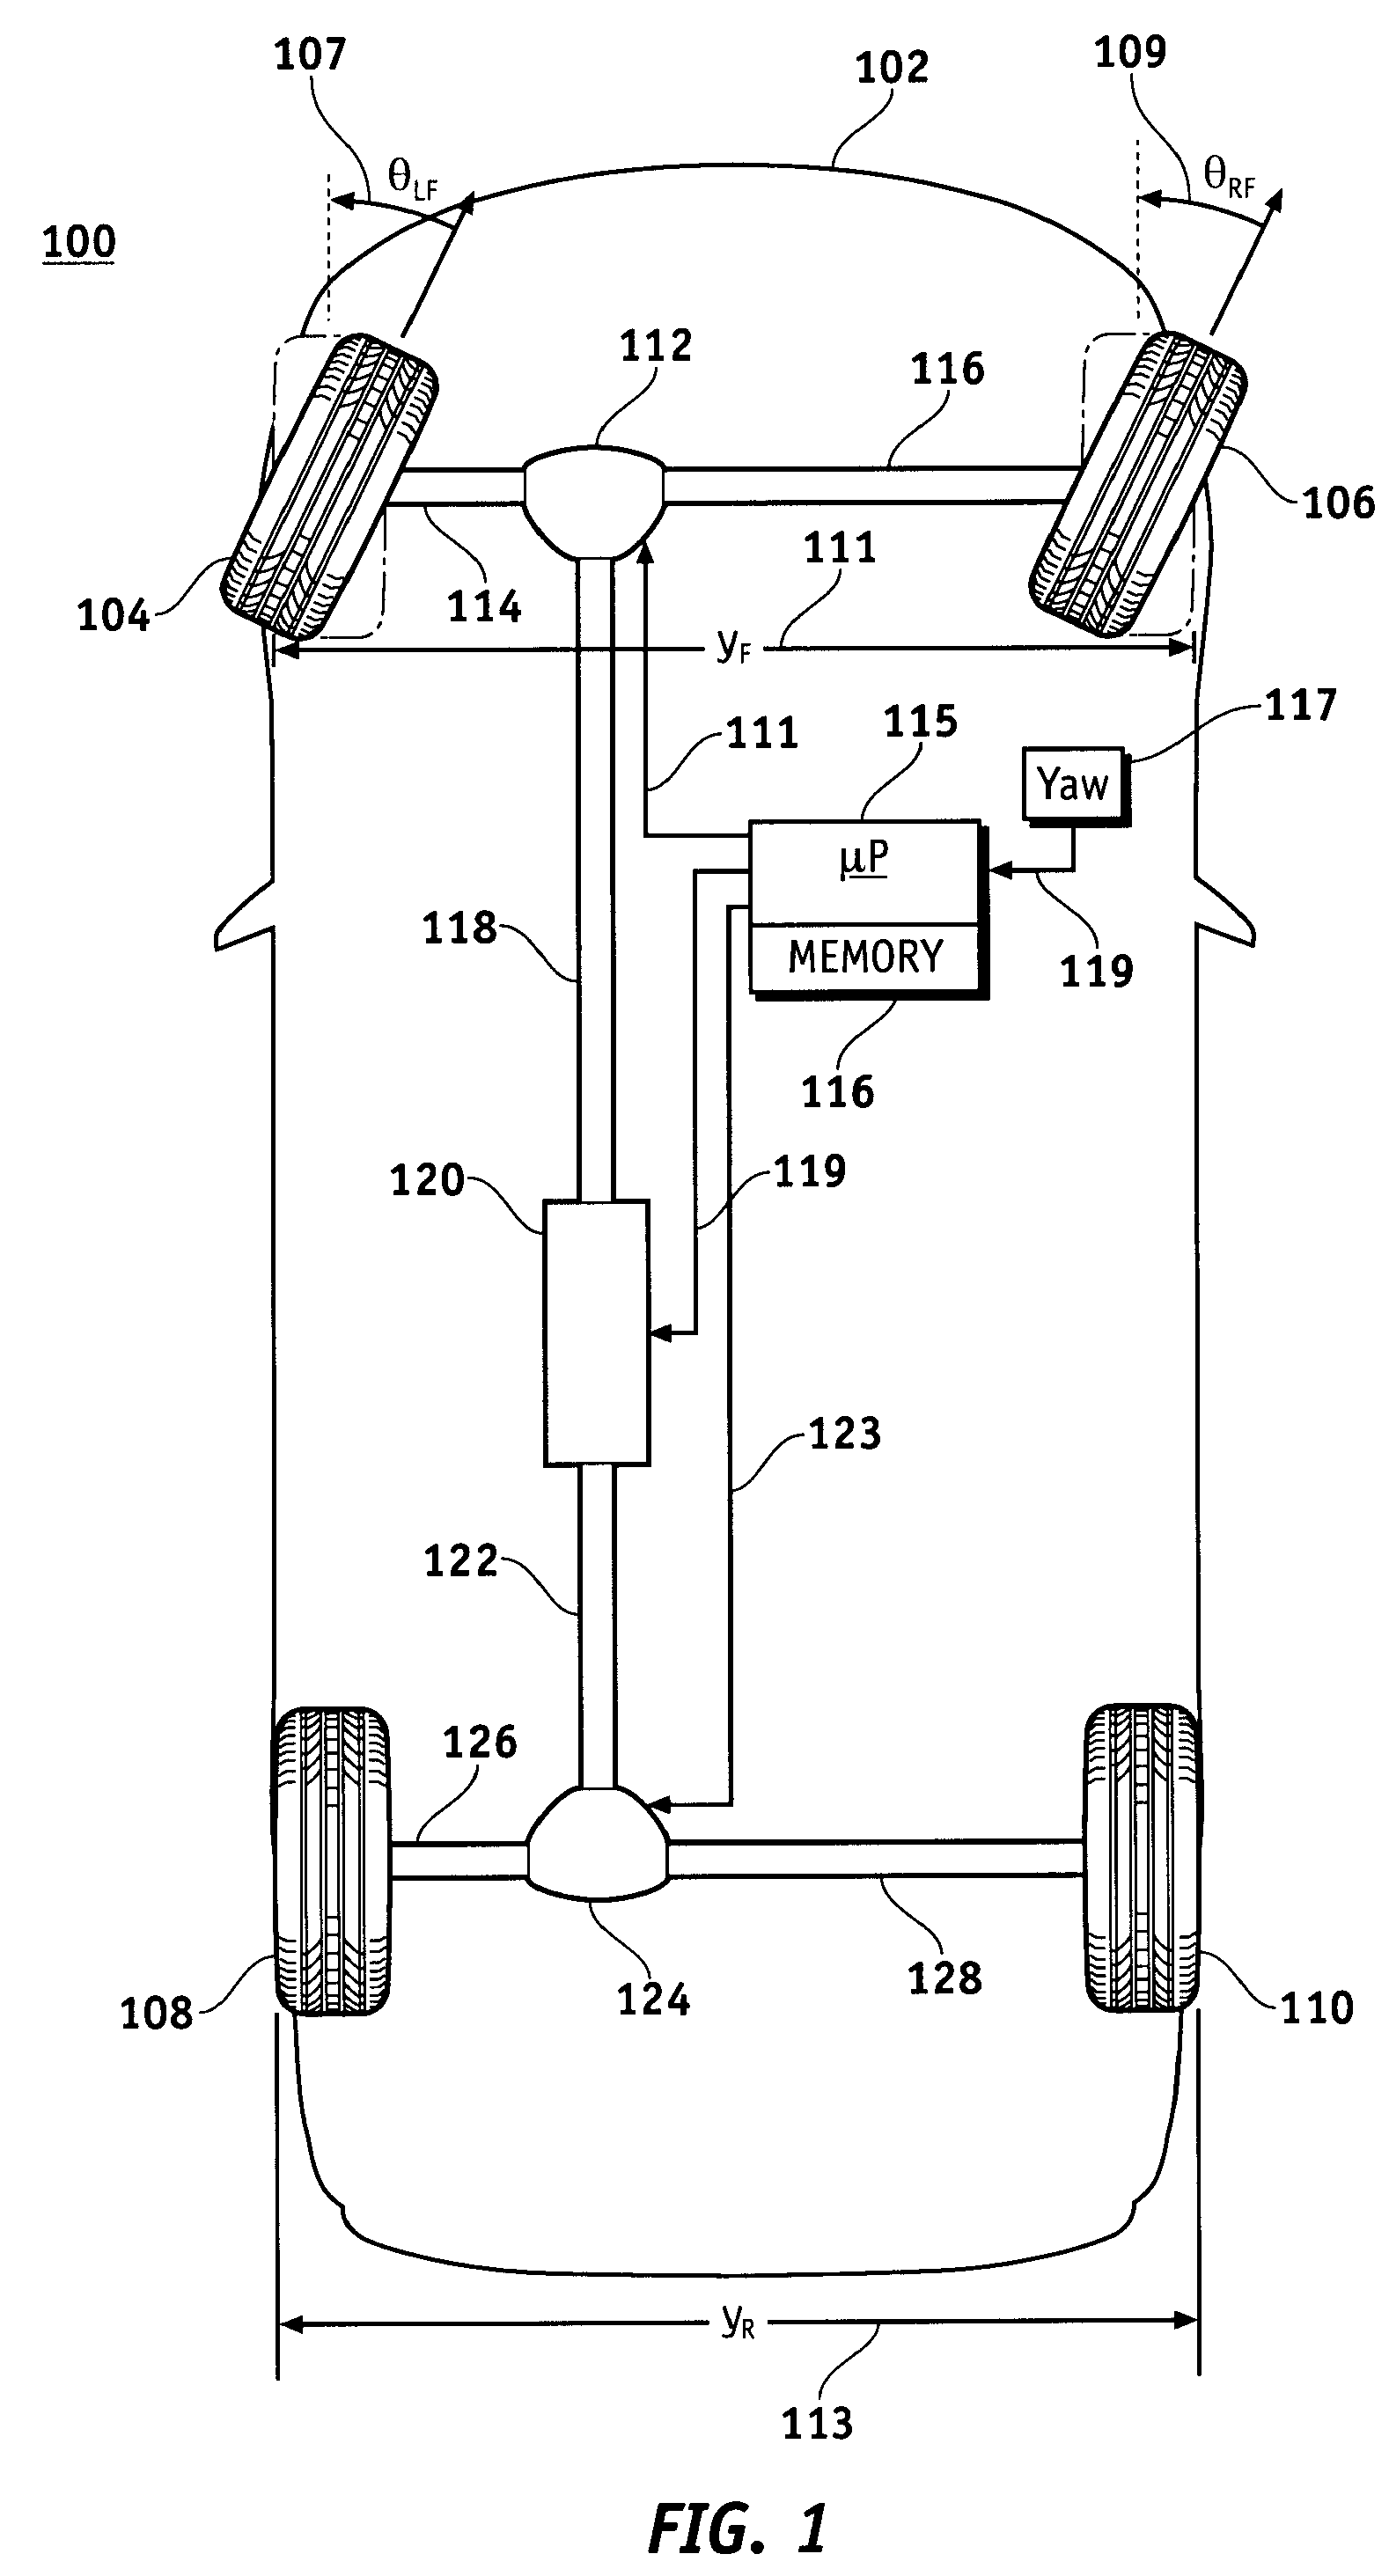 Method and apparatus for generating a cornering-corrected eLSD control signal